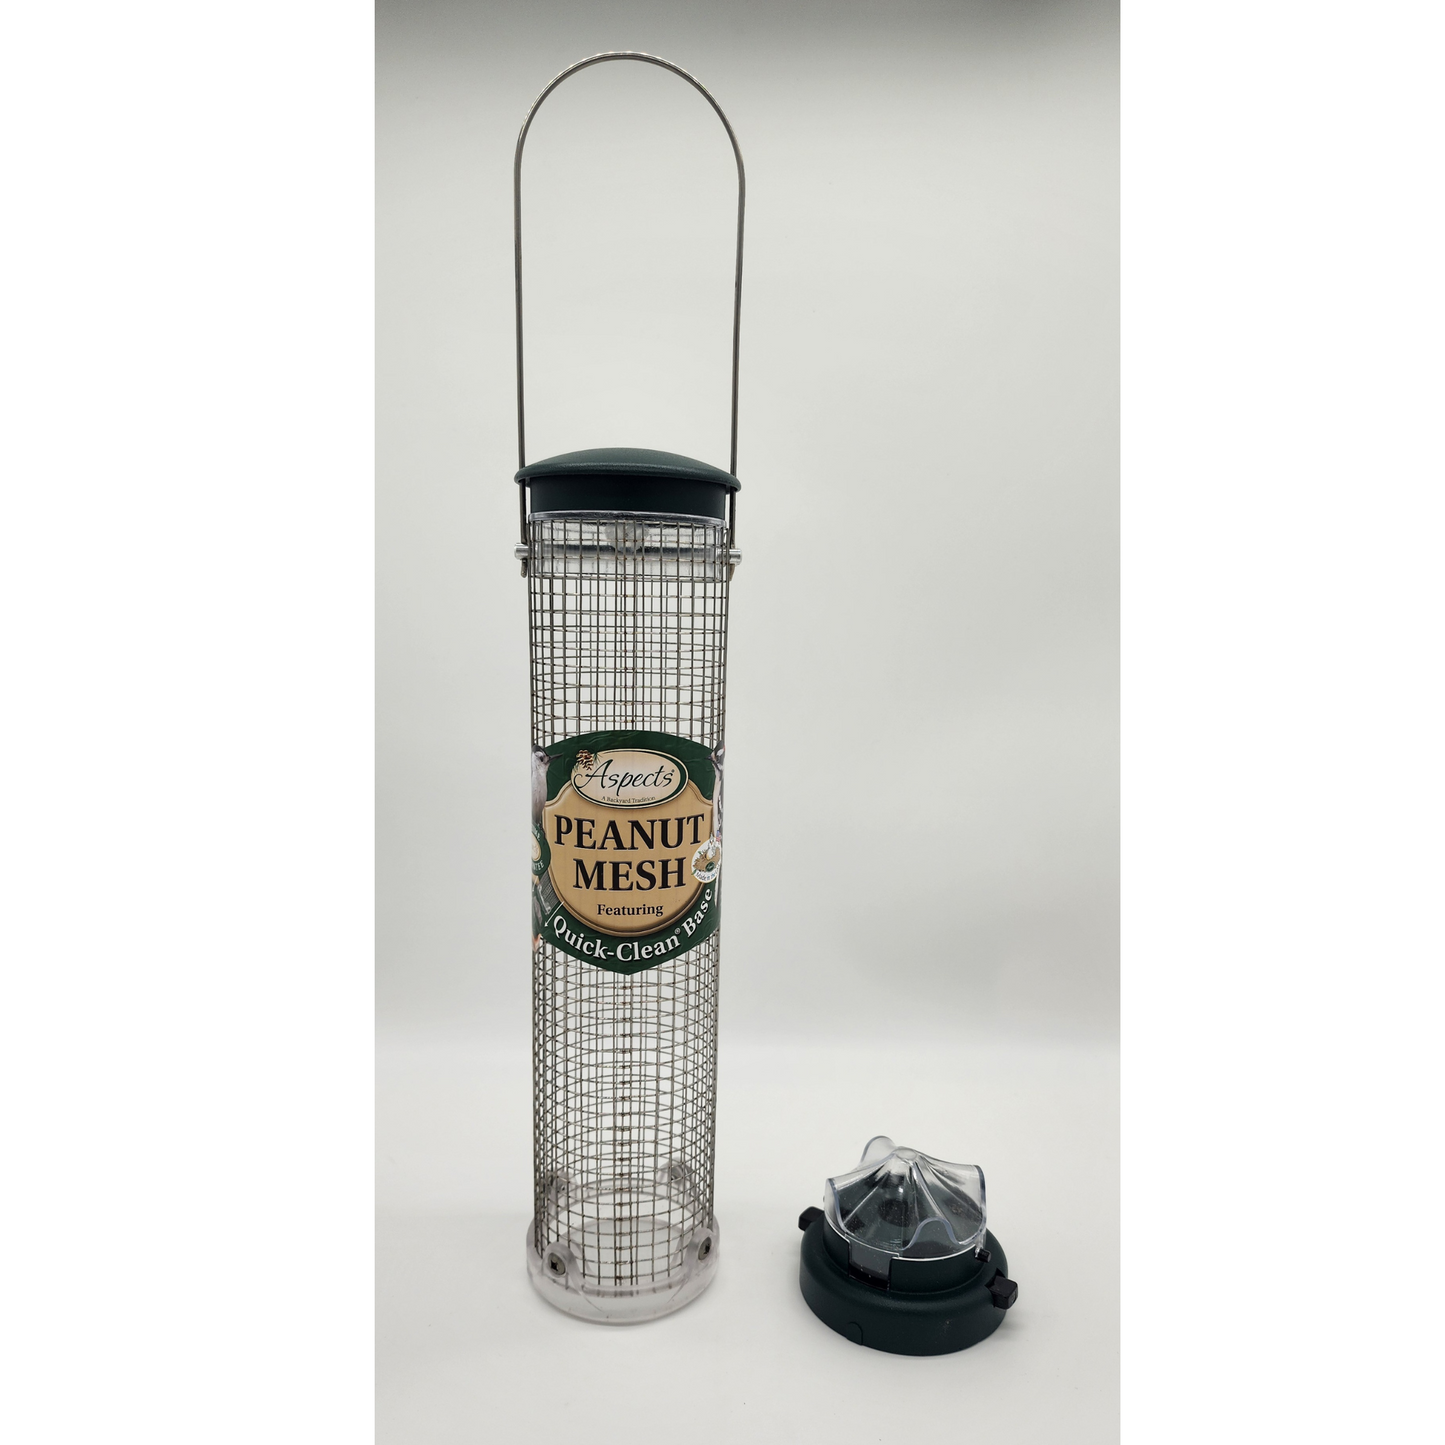 Mesh feeder with green top and base